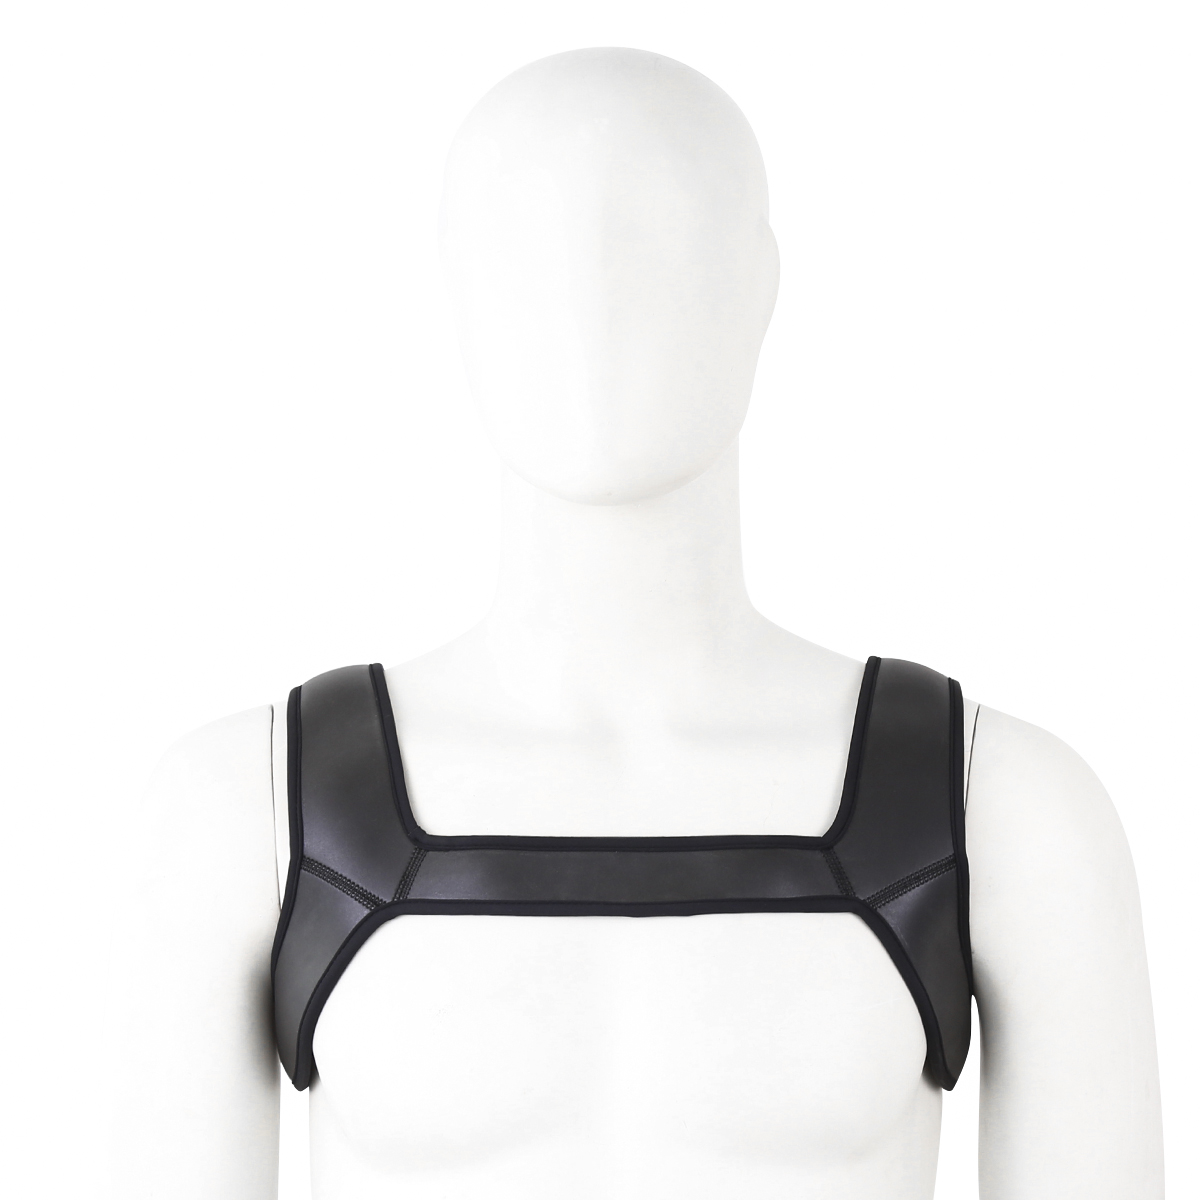 Harness-Sport-Muscle-Protector-L-OPR-321005-2